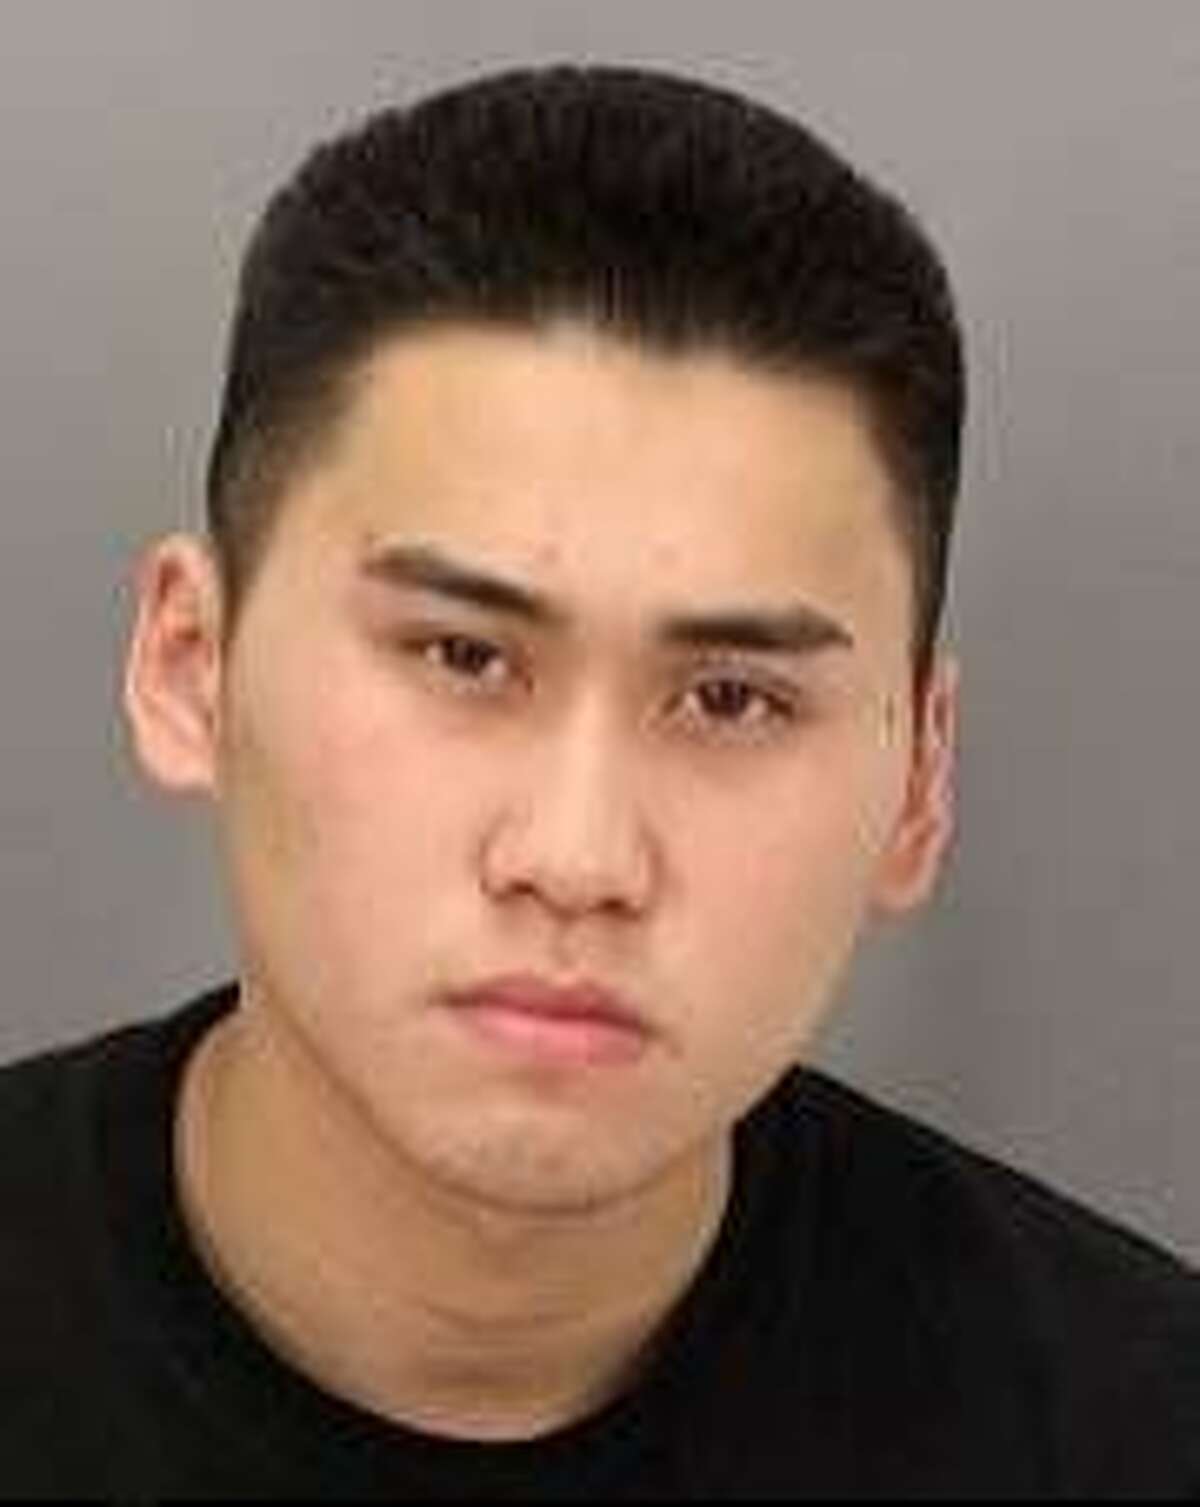 San Jose Police Department arrested two suspects, Anh Tong and his brother Duc Tong (pictured) in the January 26, 2014 murder of Richard Phan that occurred on the 3400 block of Suncrest Avenue in San Jose.